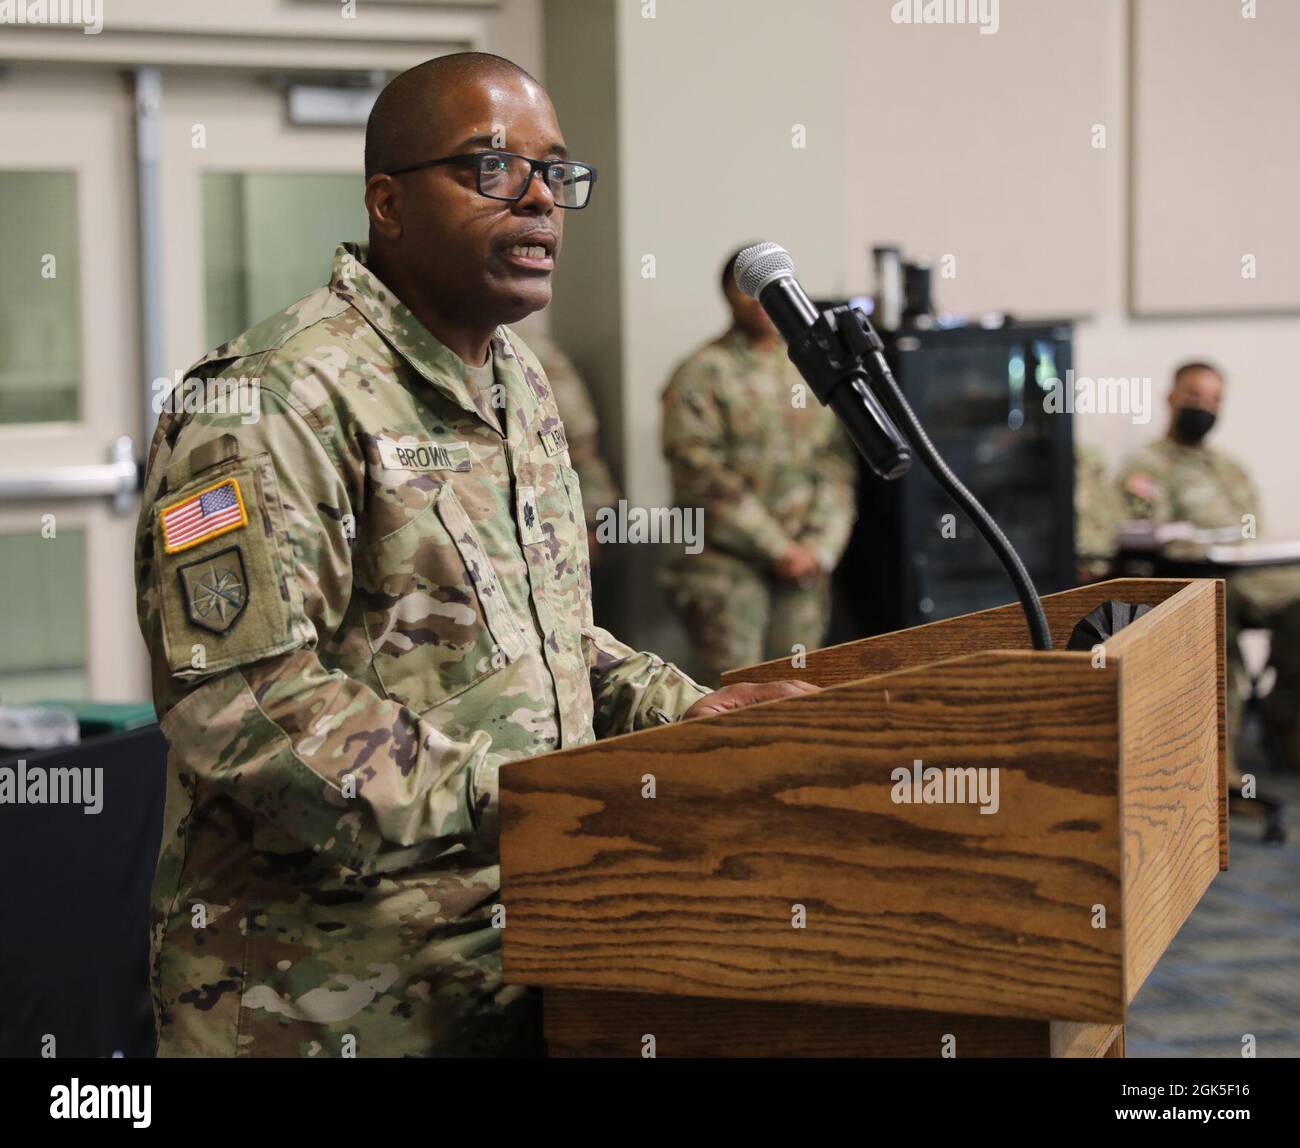 U.S. Army Lieutenant Colonel Pervis Brown, the outgoing commander of the Marietta-based 781st Troop Command Battalion, Georgia Army National Guard, thanks friends and family during his change of command ceremony at Clay National Guard Center Marietta, Georgia, on August 7, 2021. Brown relinquished his command to Maj. Aaron Holt, who previously served as the battalion's executive officer in 2017. Stock Photo